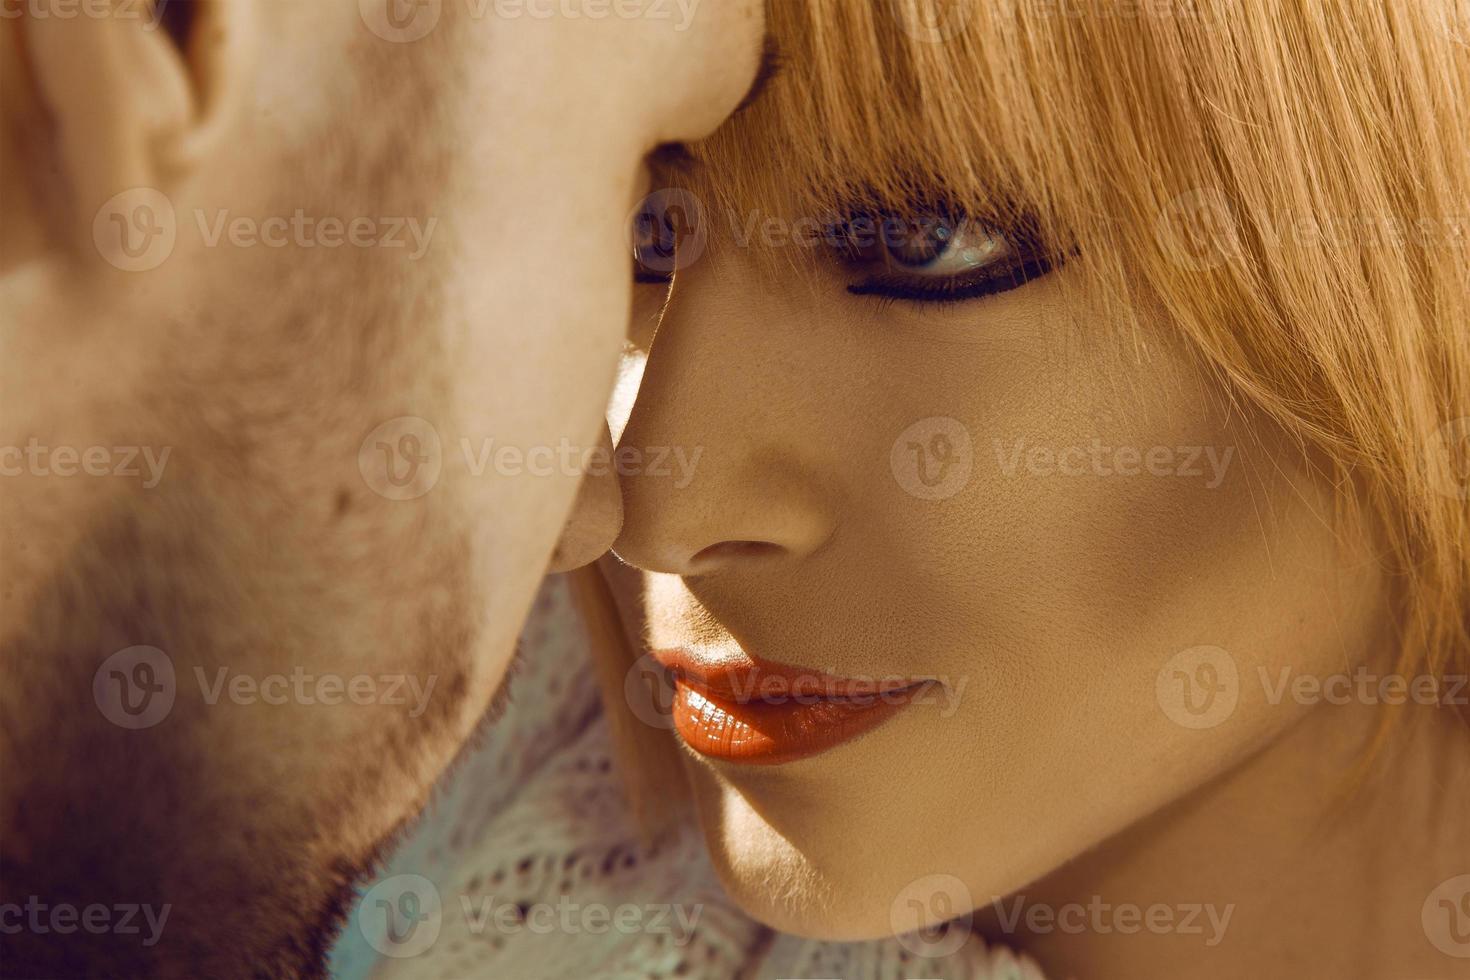 Passion look at each others in young couple photo